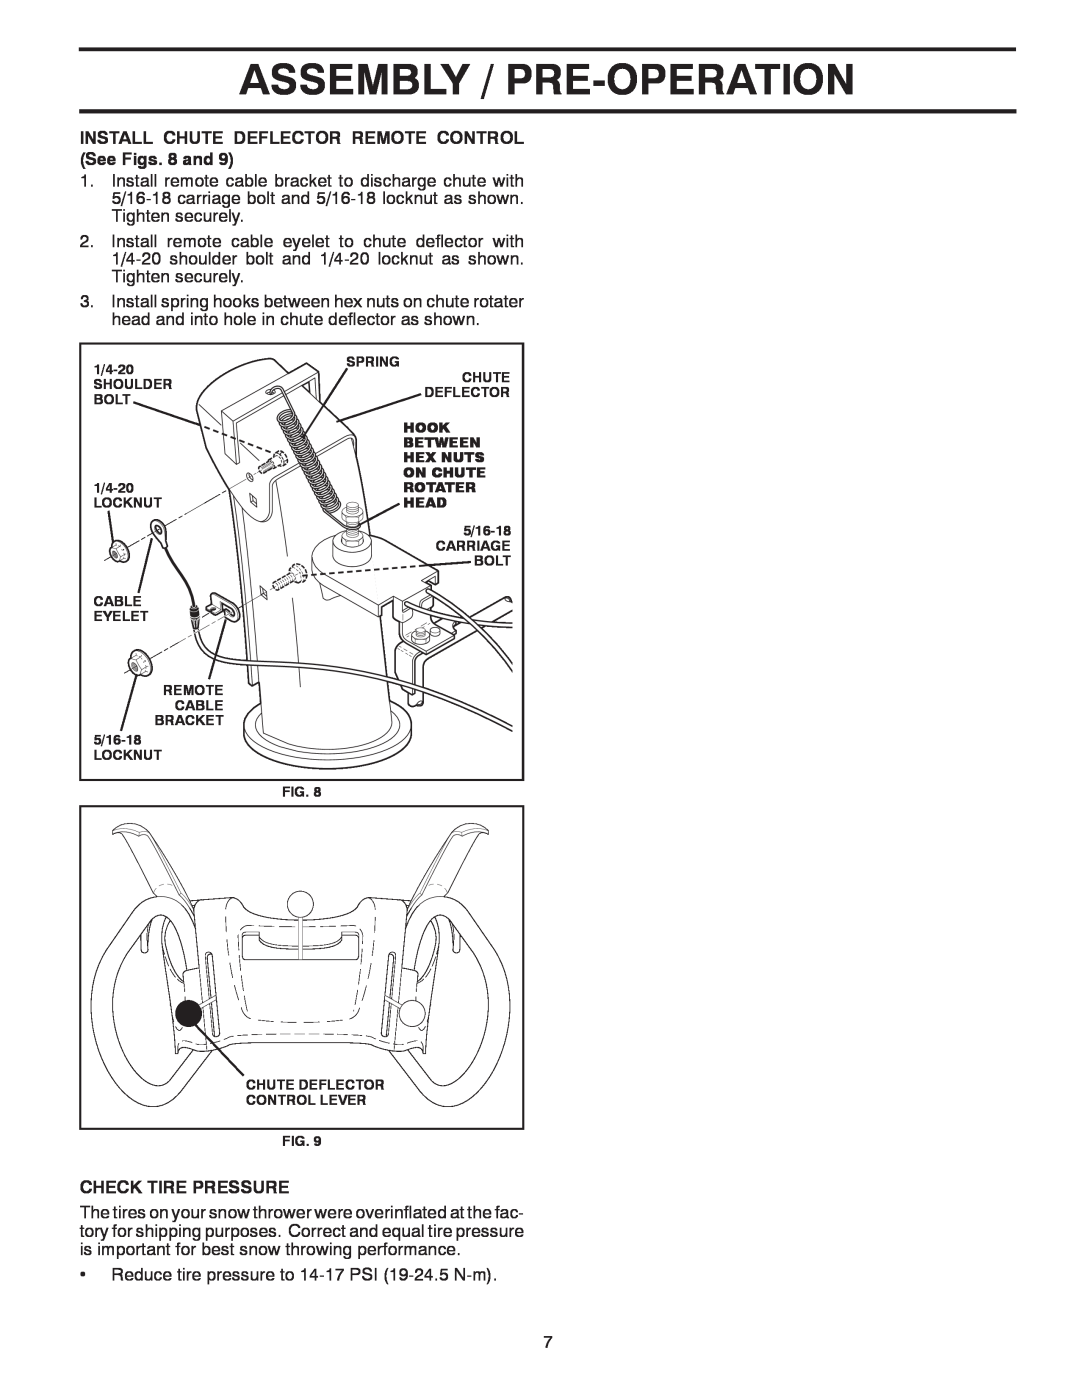 Husqvarna 15530SB-LS Assembly / Pre-Operation, INSTALL CHUTE DEFLECTOR REMOTE CONTROL See Figs. 8 and, Check Tire Pressure 